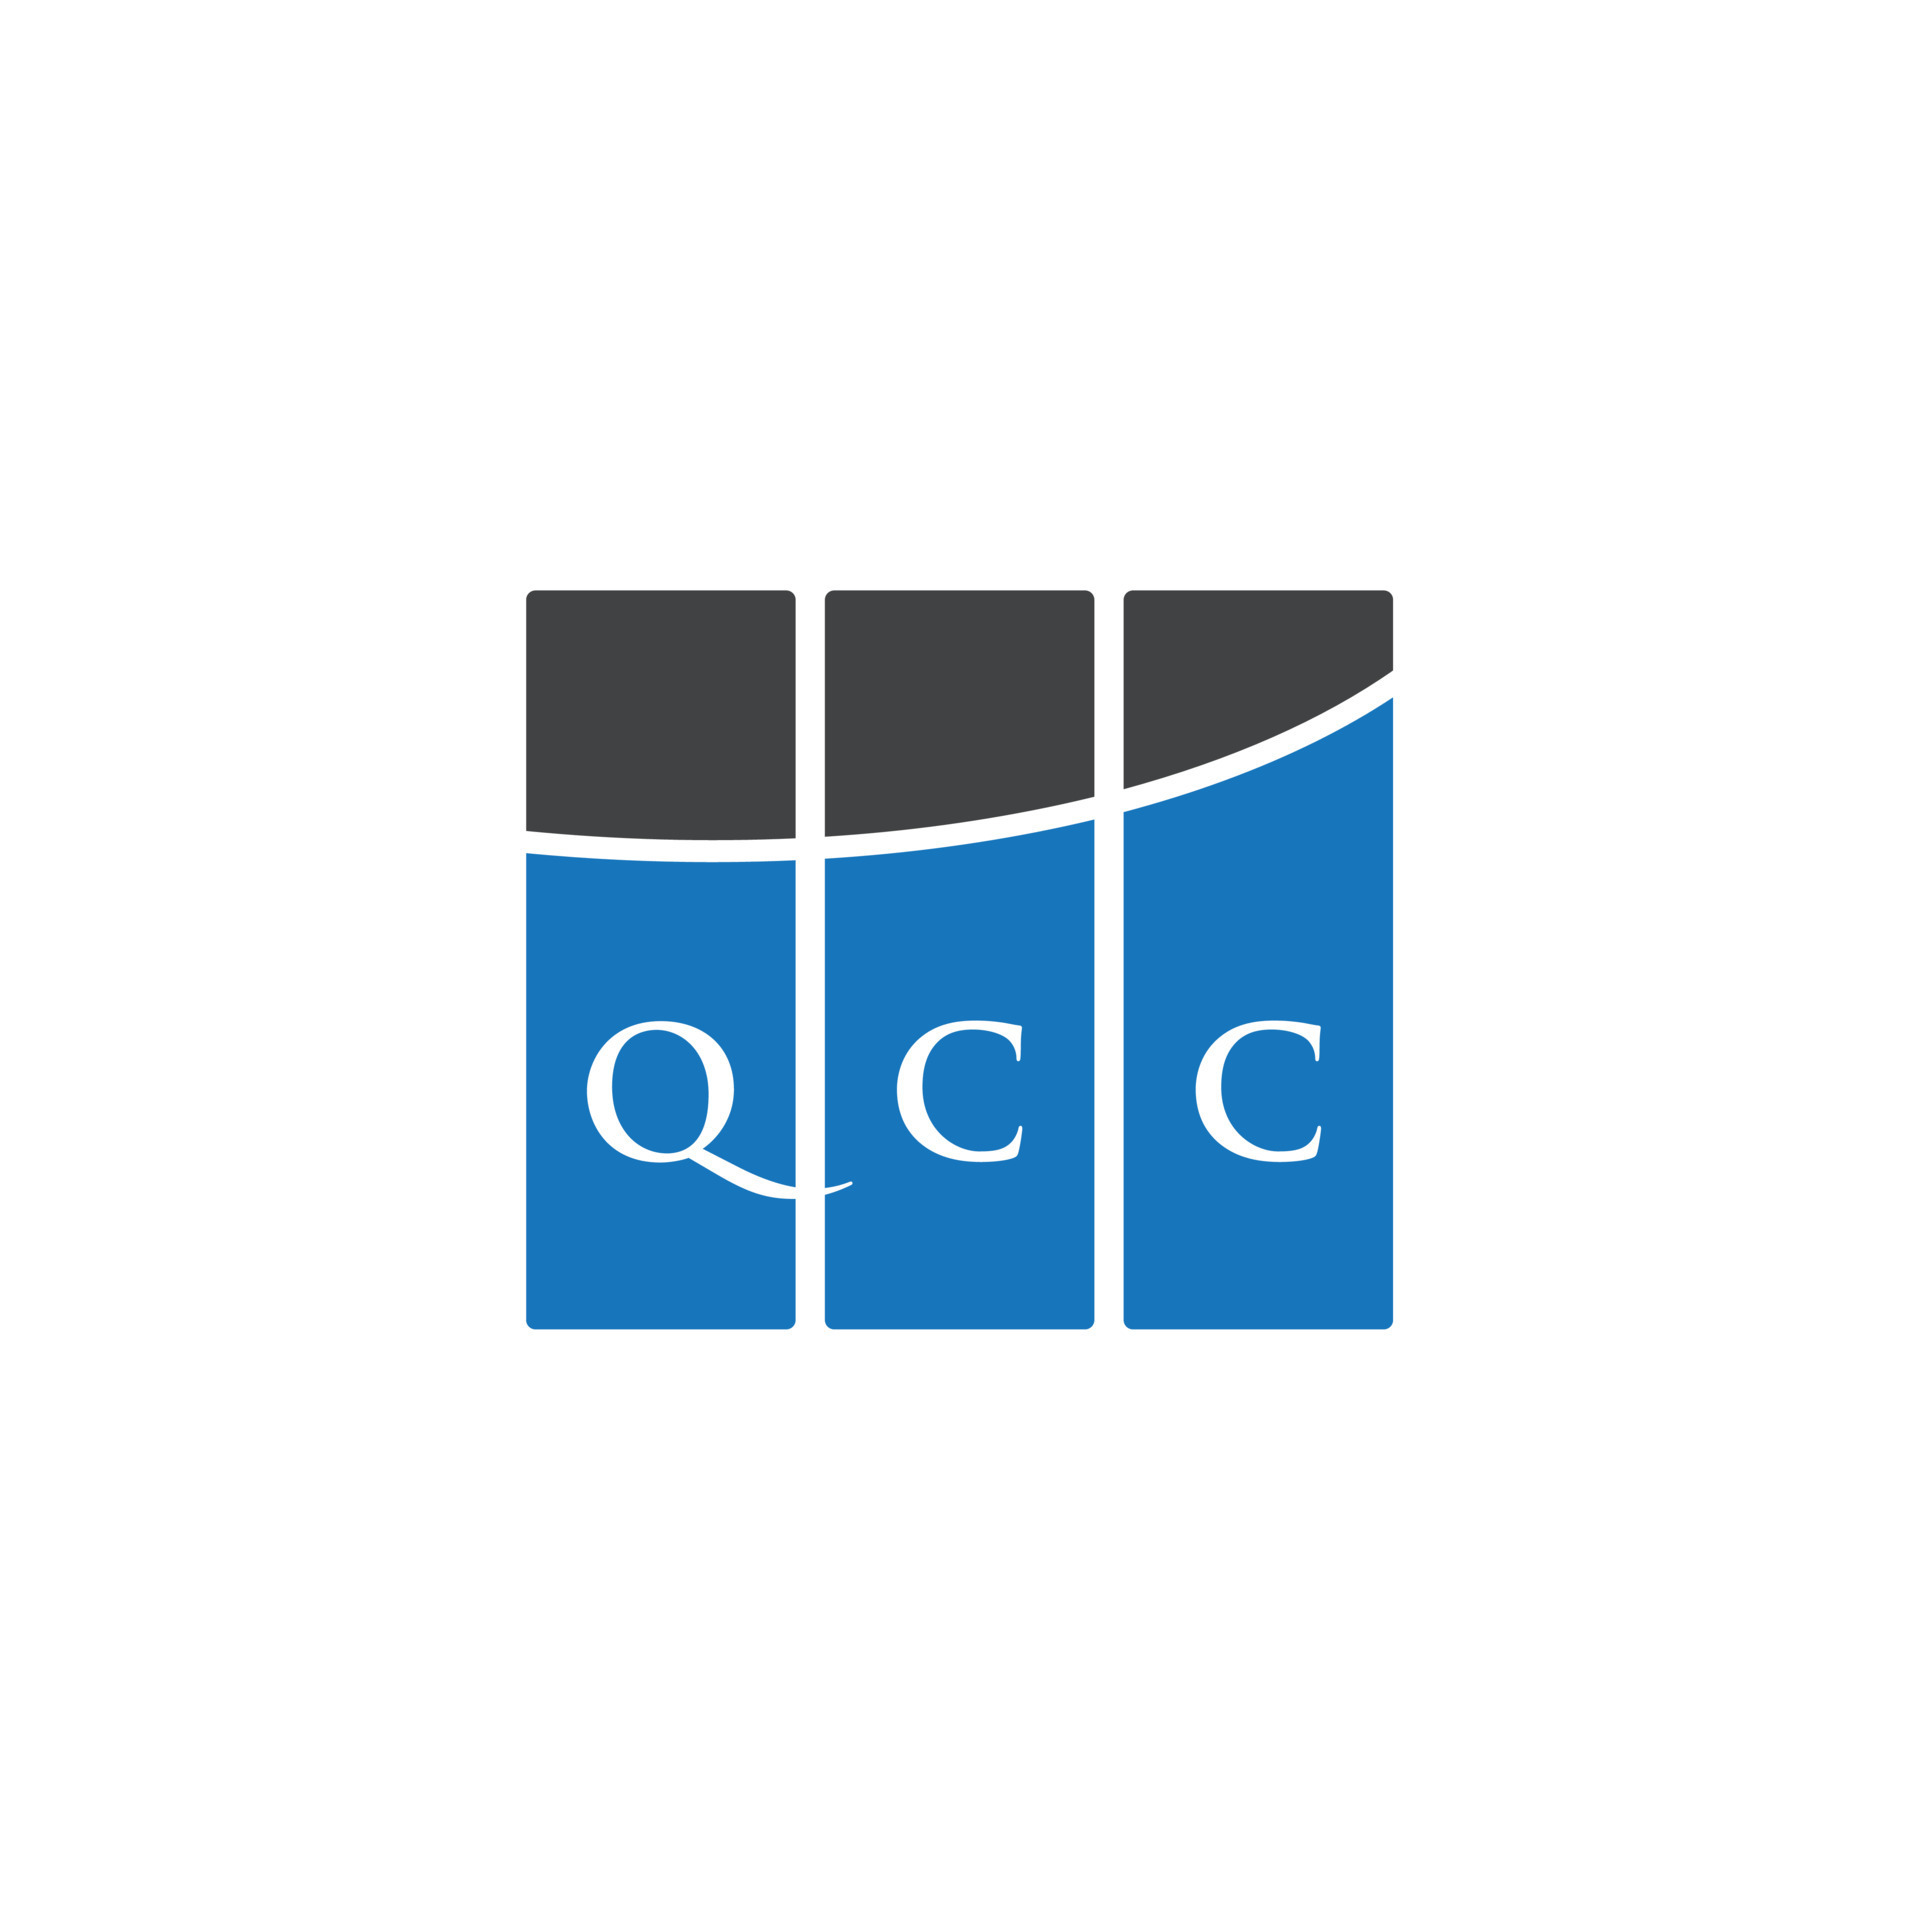 QCC letter technology logo design on white background. QCC creative initials letter IT logo ...